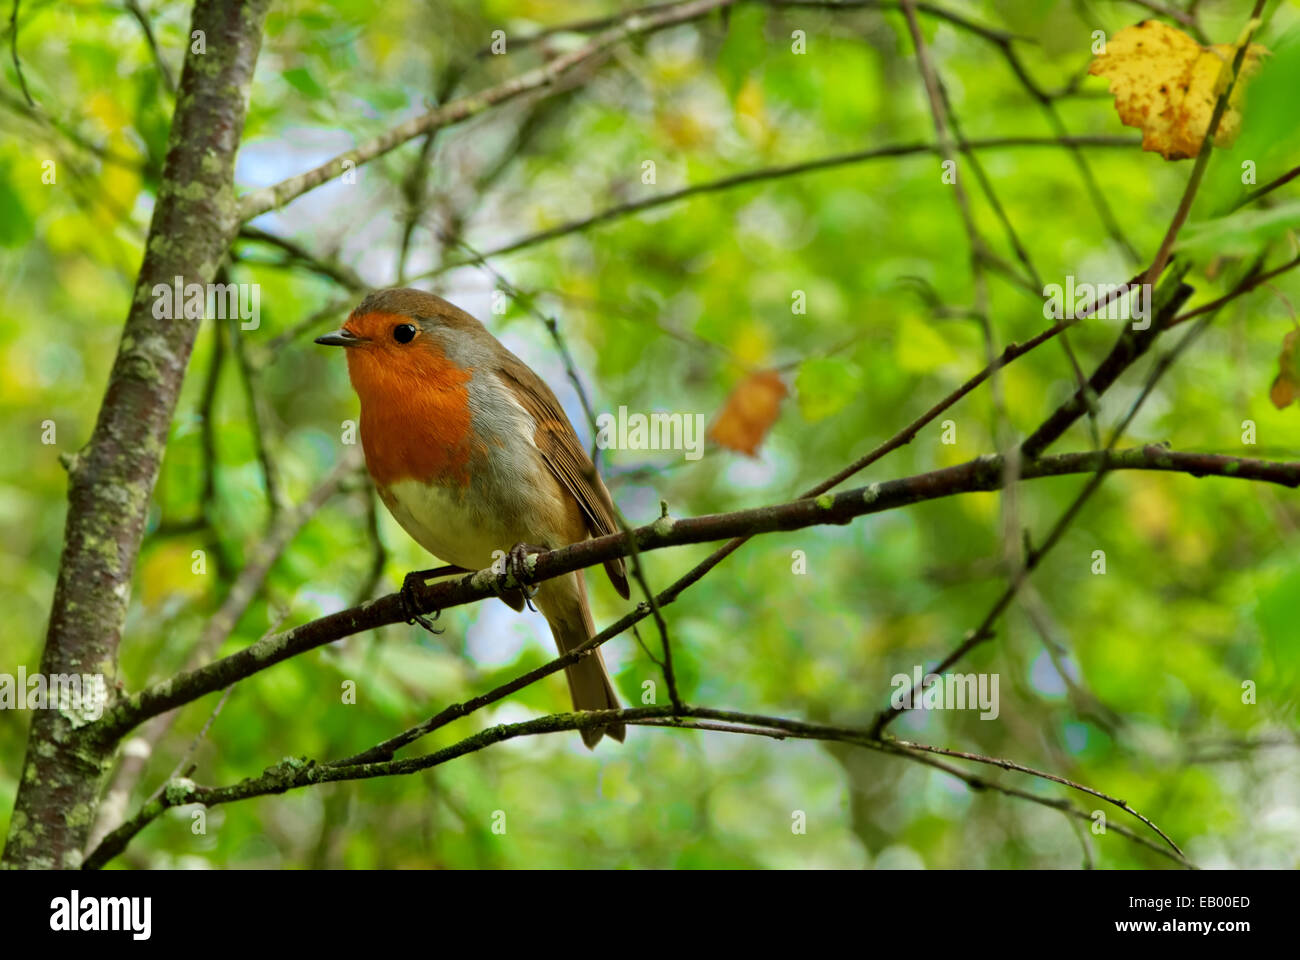 English Robin on a branch in the forest Stock Photo